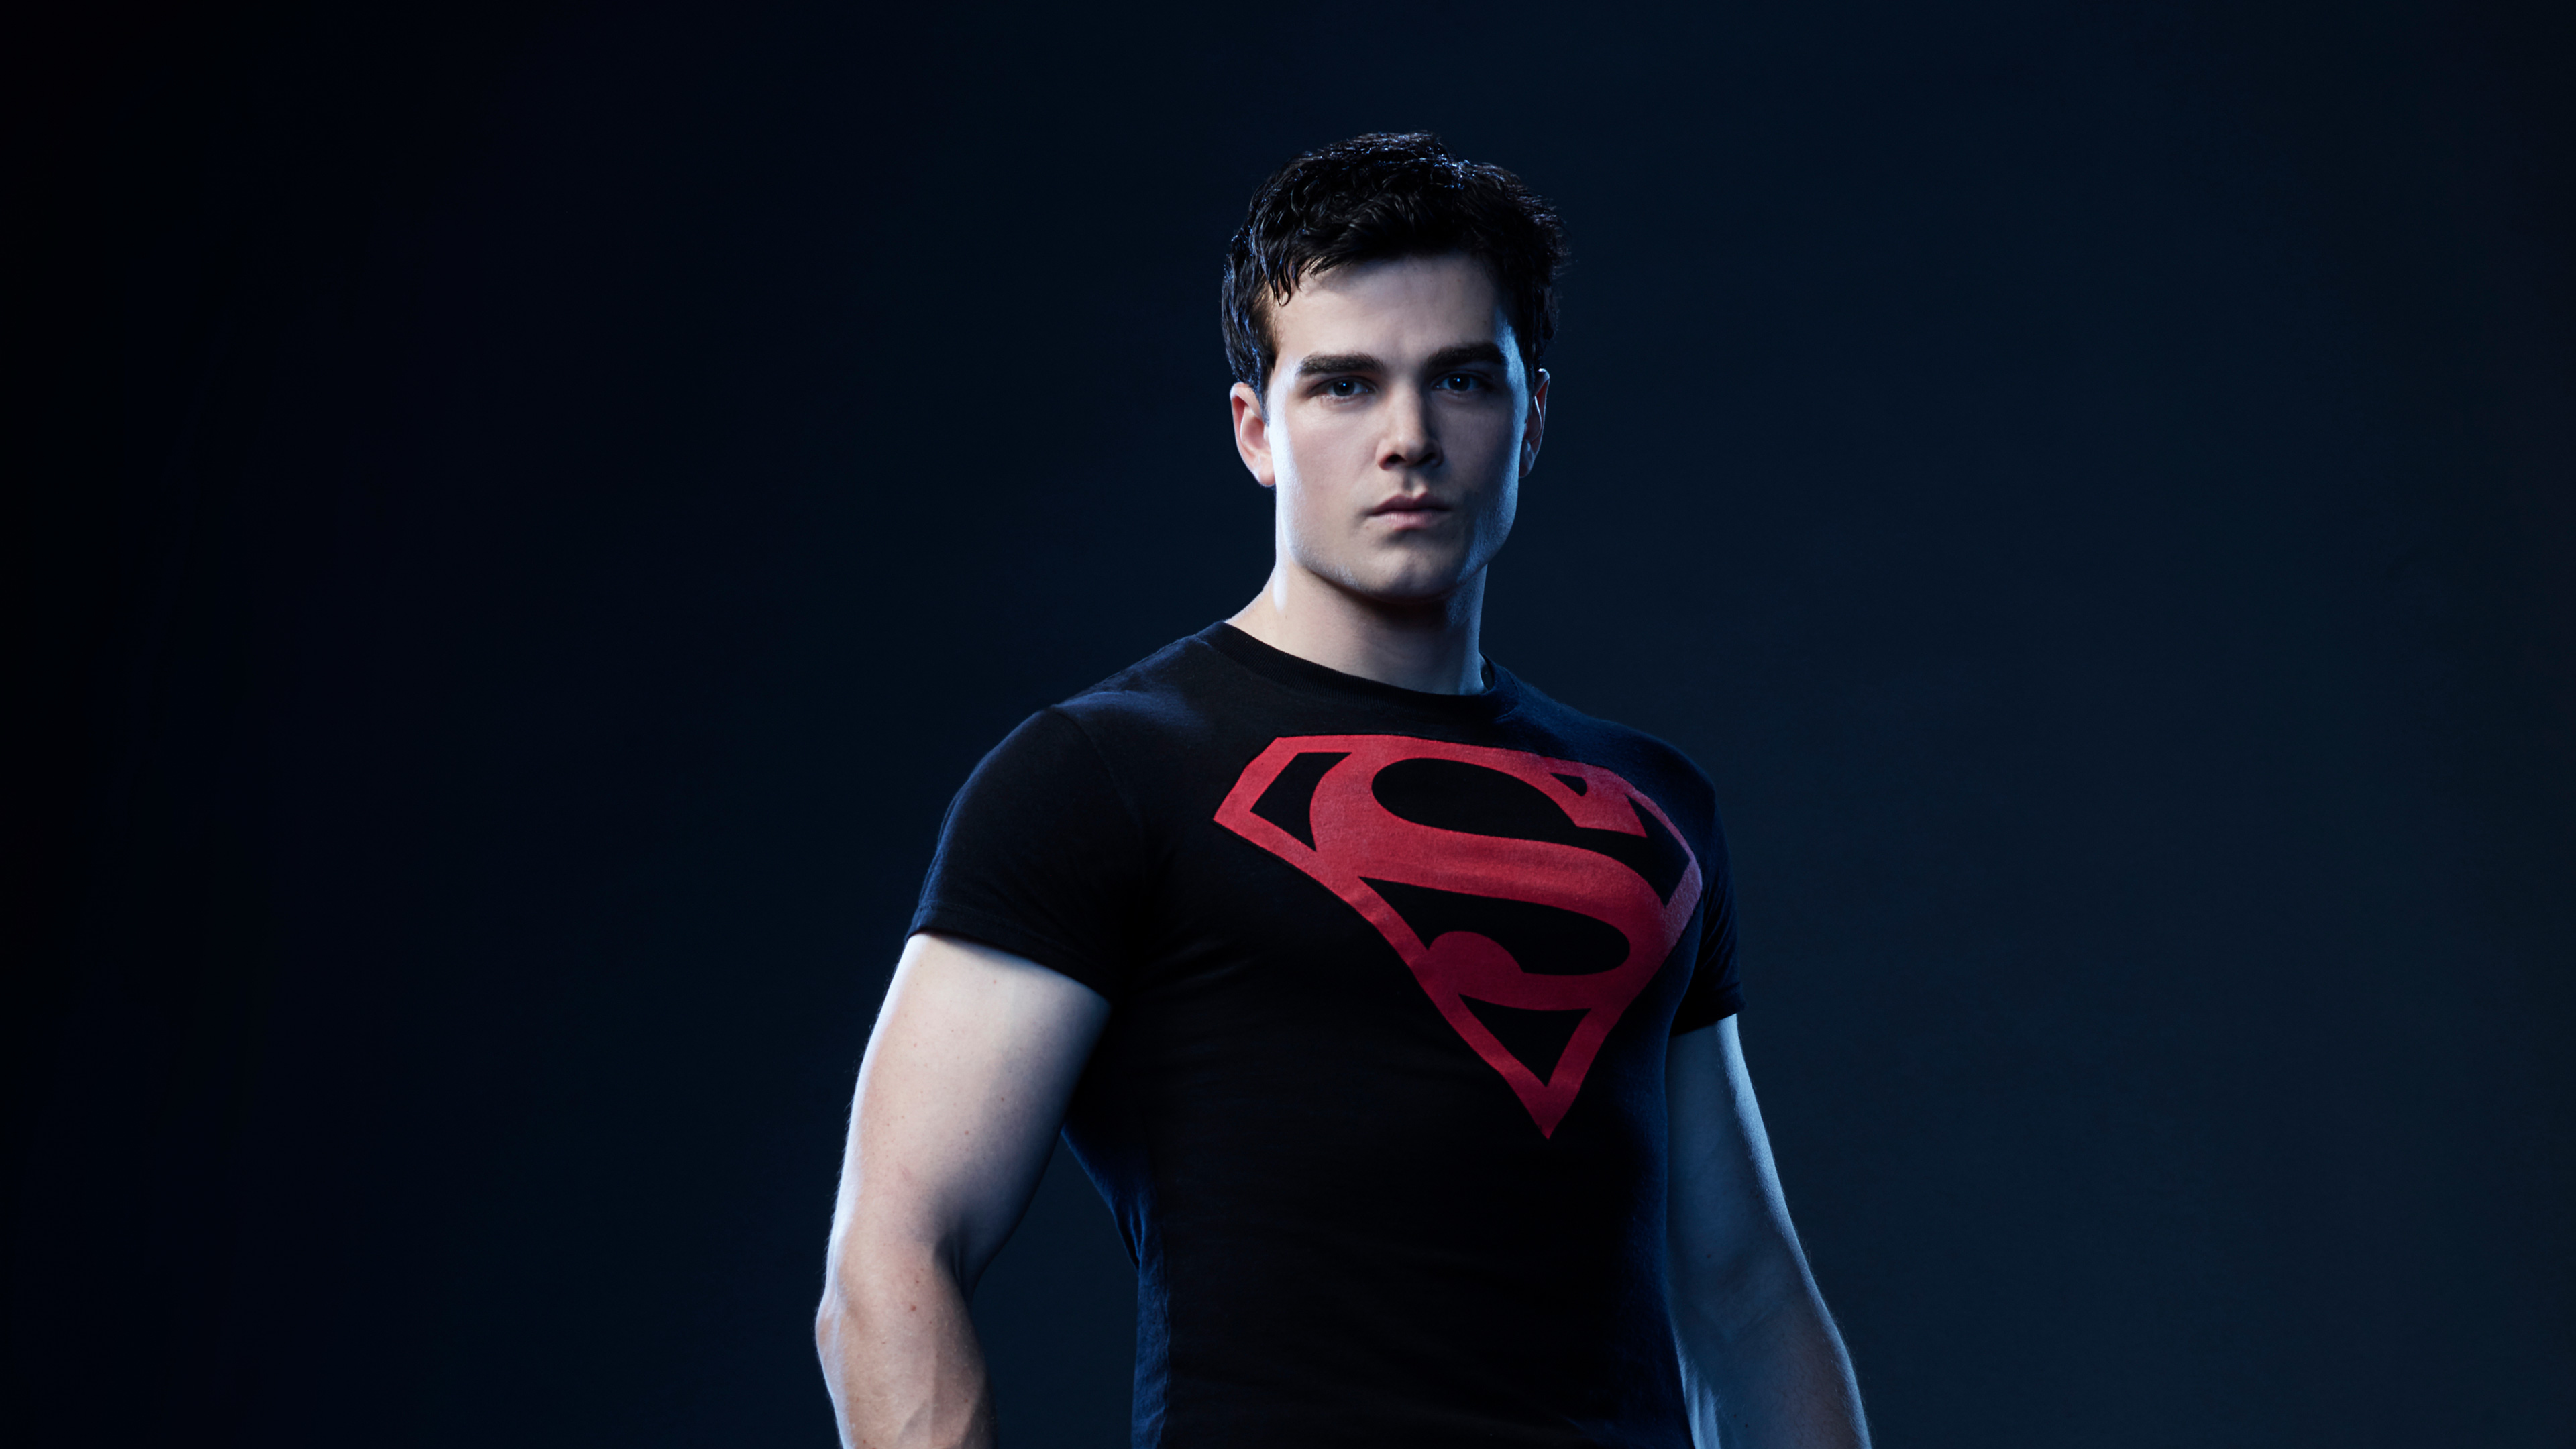 1920x1080 / 1920x1080 superboy widescreen wallpaper - Coolwallpapers.me!